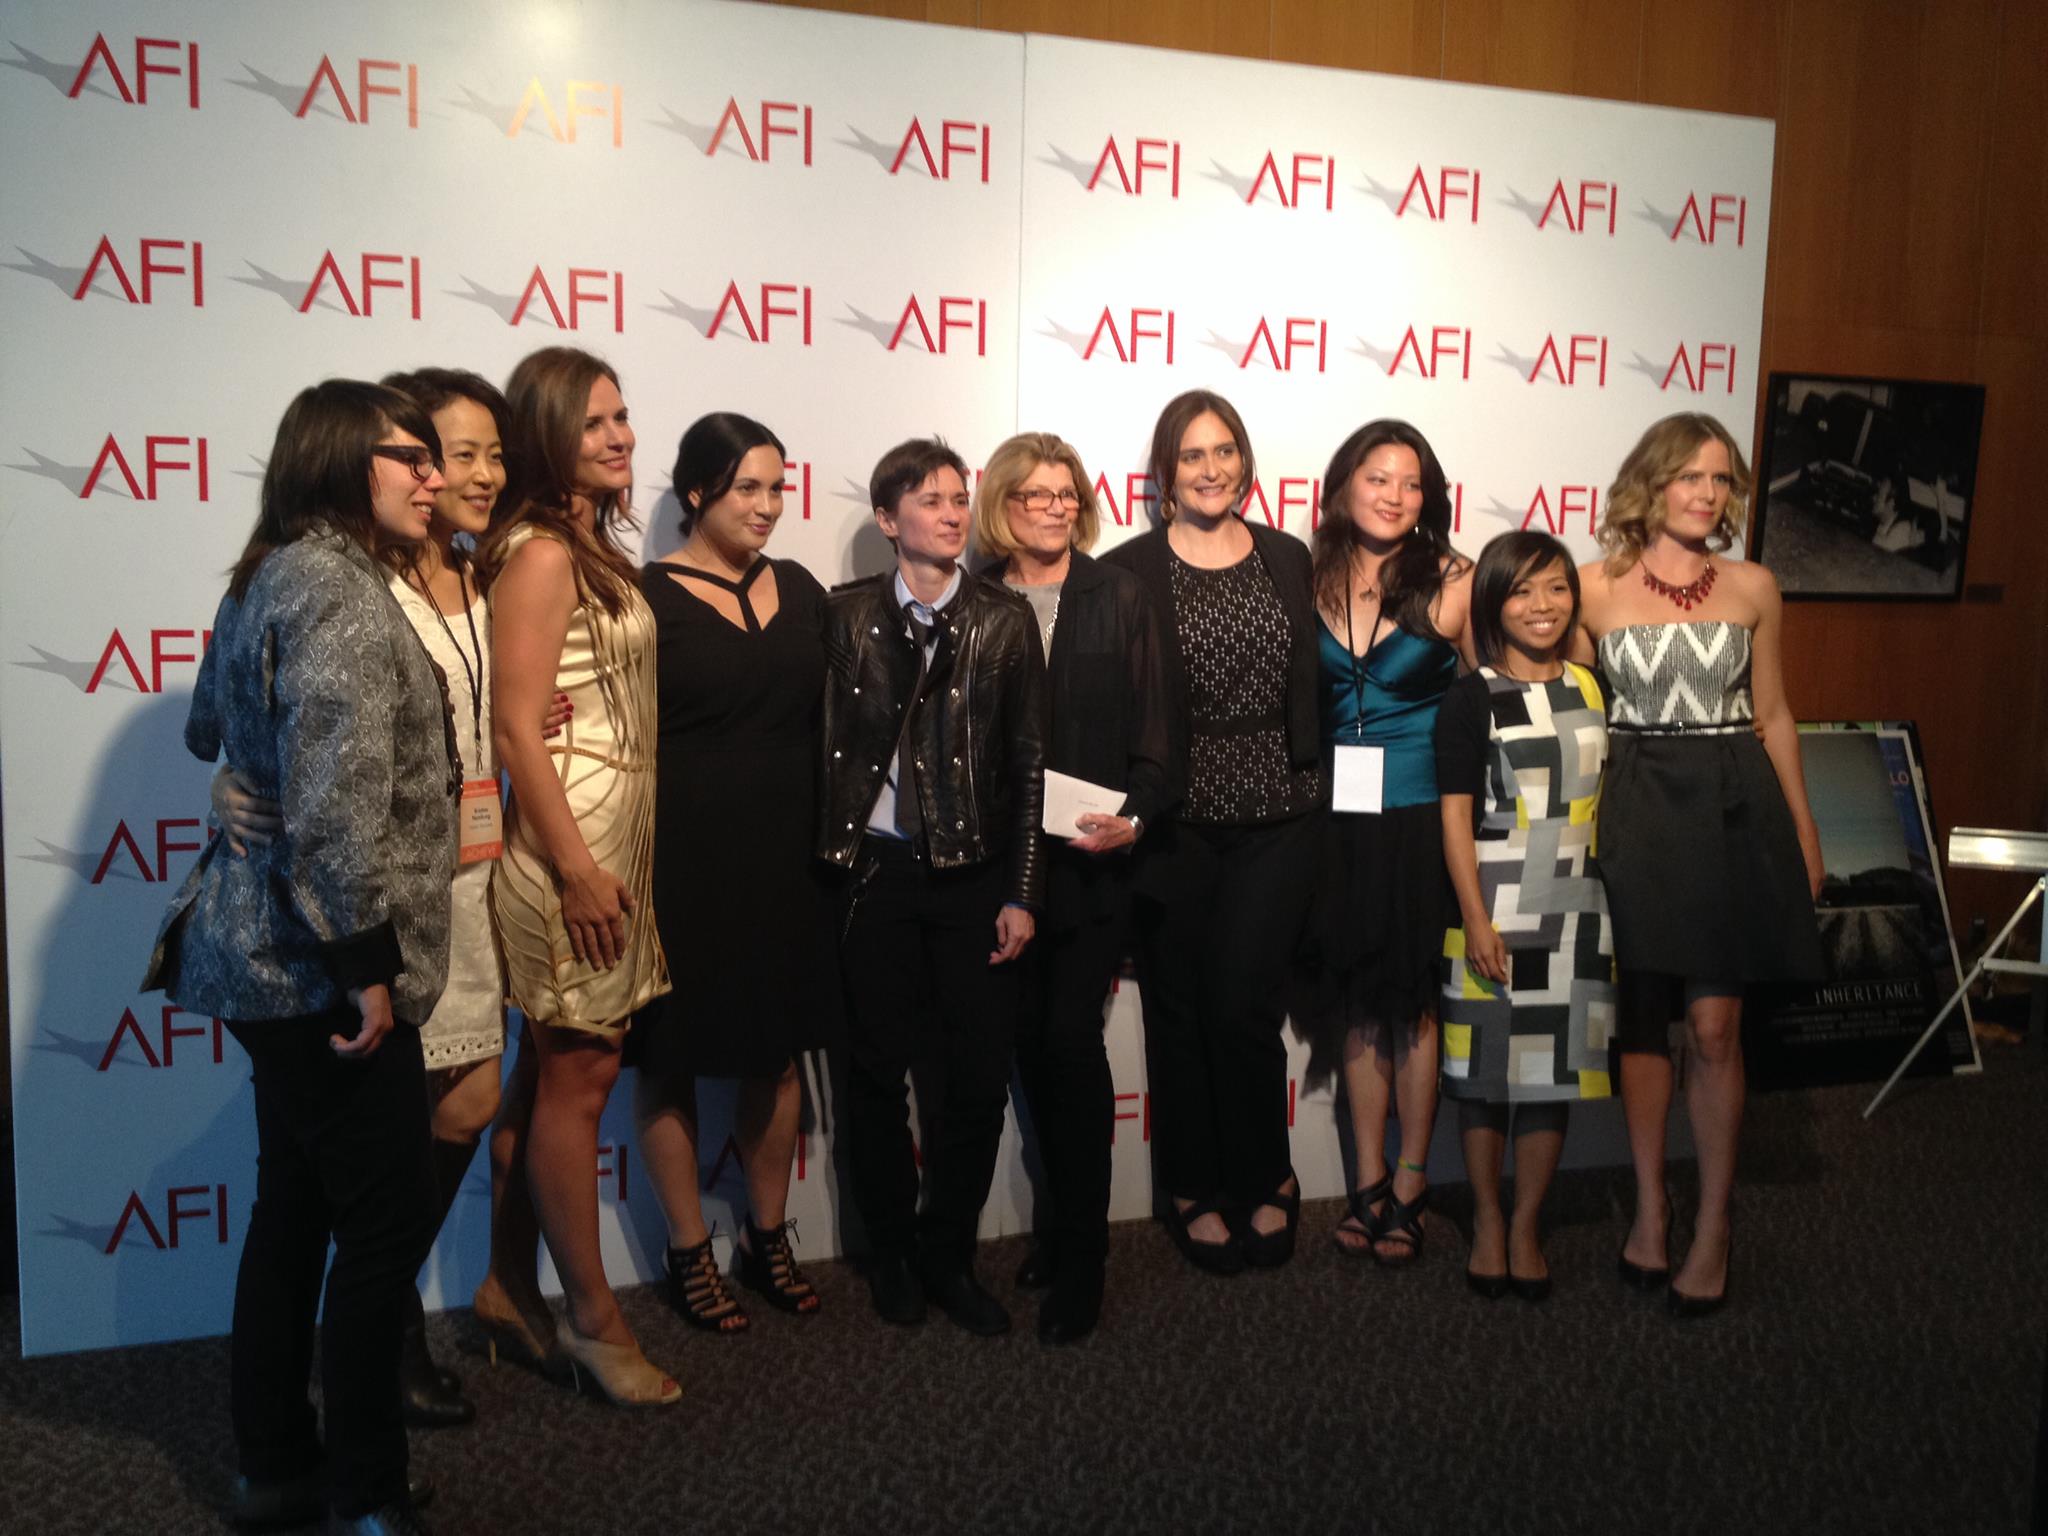 2013 Class of AFI's Directing Workshop for Women